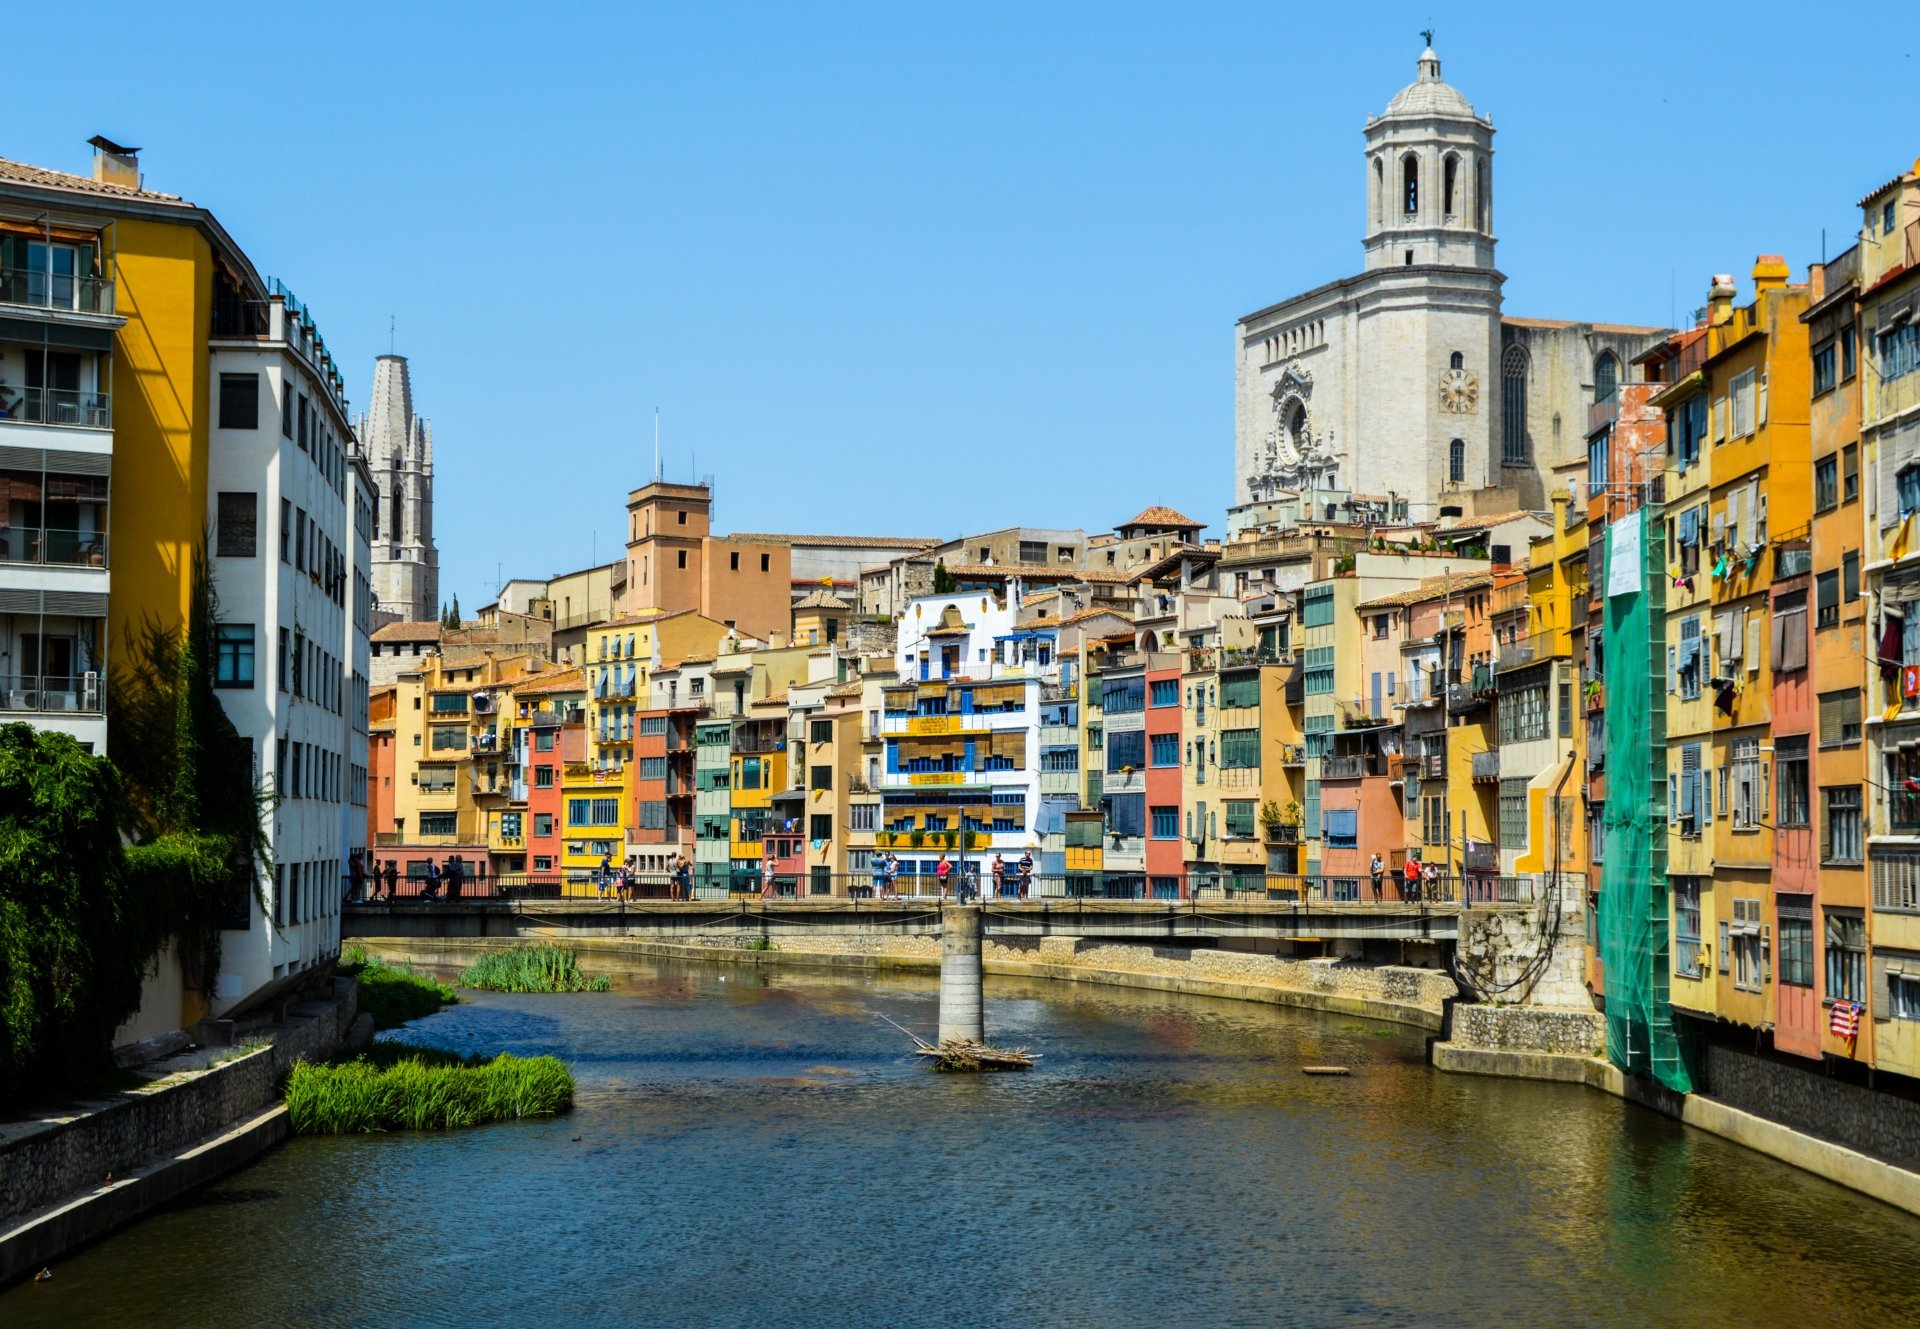 Day trip to Girona: everything you need to know